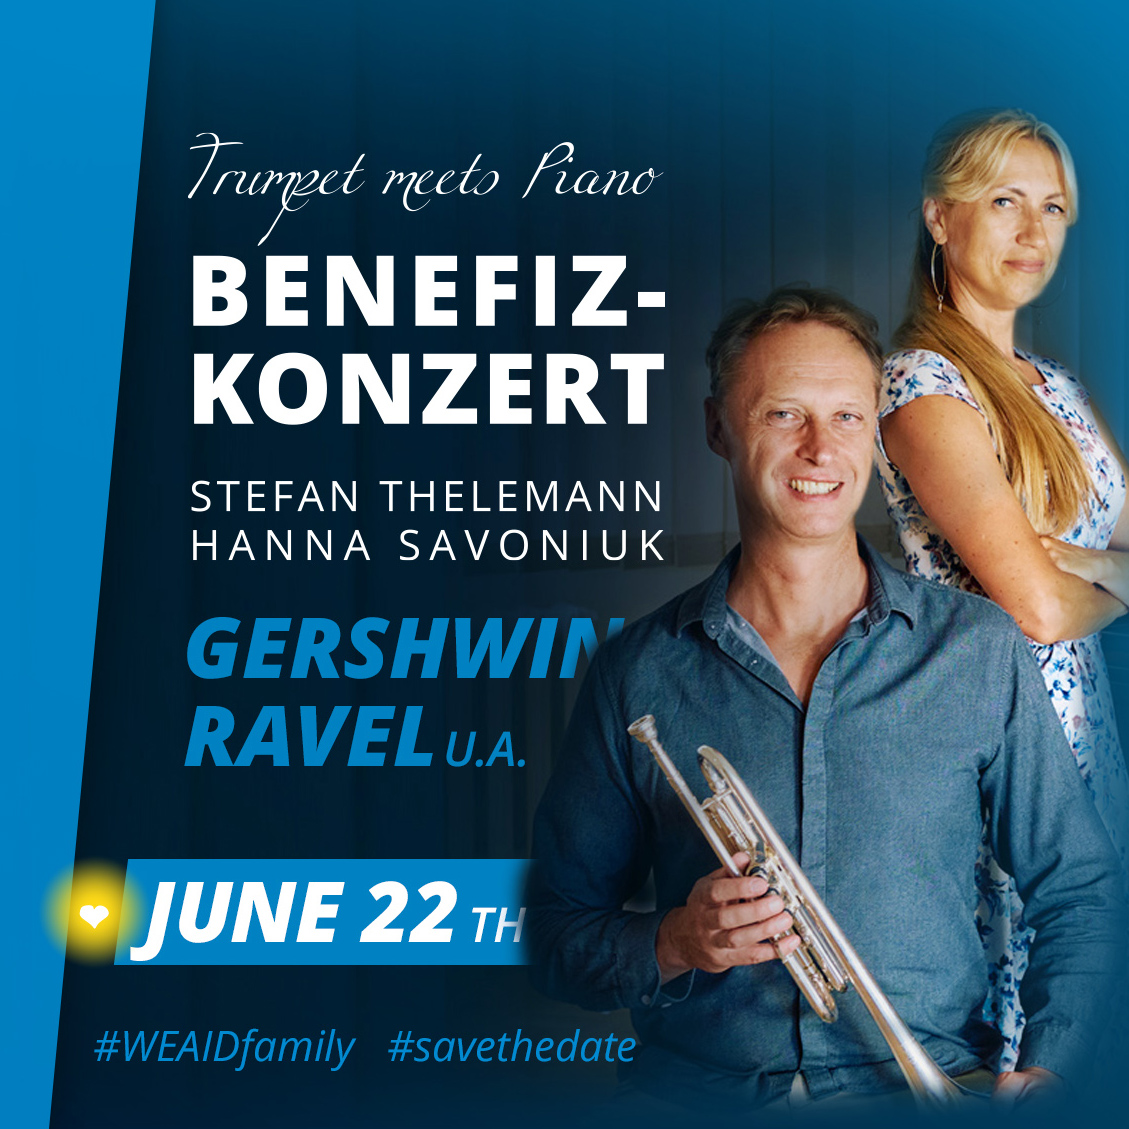 NEUES BENEFIZKONZERT – 2024/ 06/ 22 – Initiative Theleman Savoniuk performing pieces by George Gershvin, Ravel and more in Berlin supported by WE AID